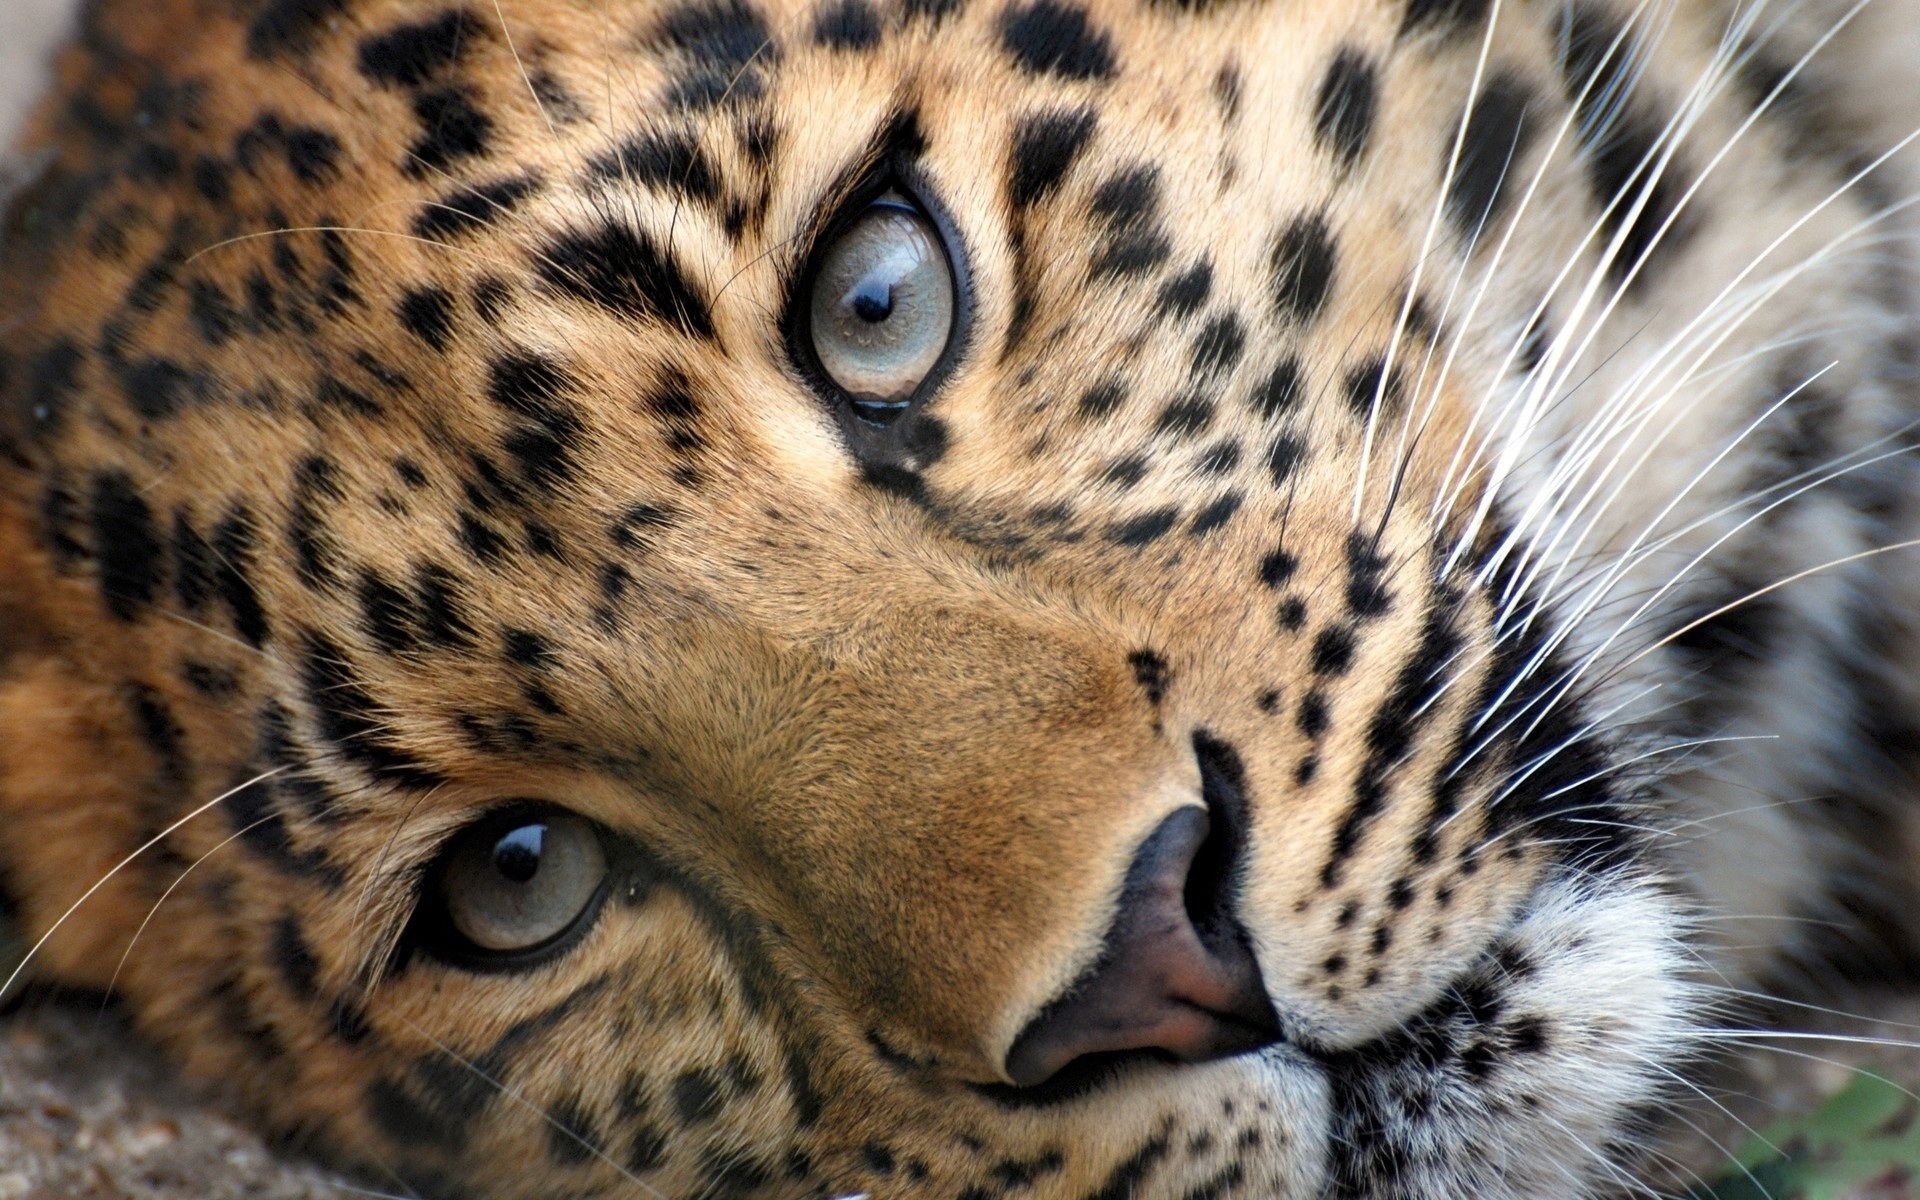 10 Top Cute Wild Animal Wallpaper FULL HD 1080p For PC Background